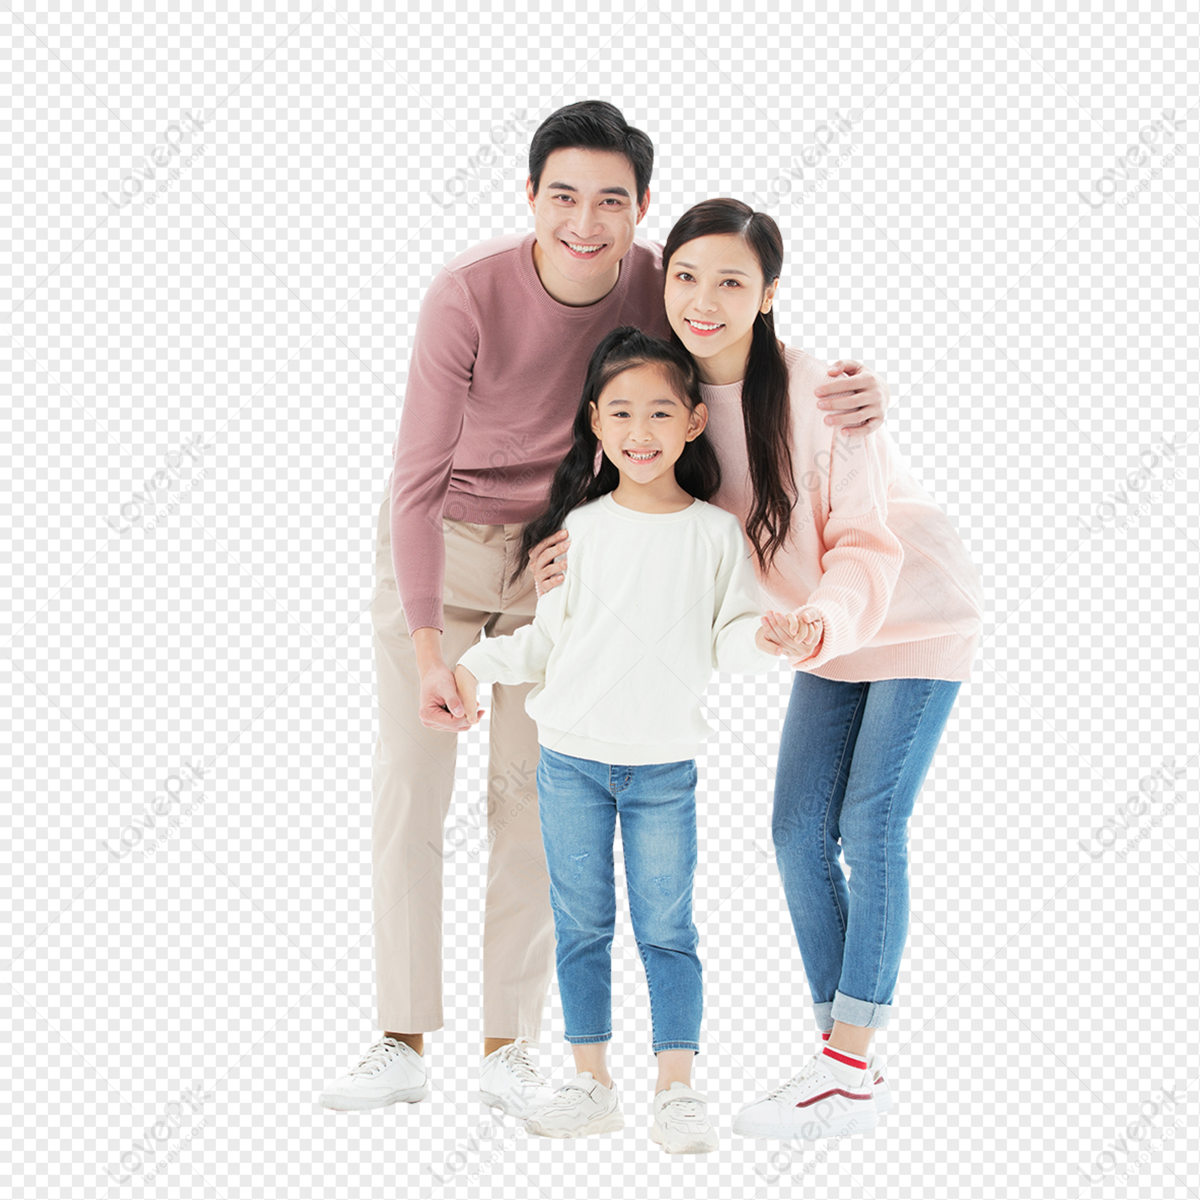 Happy Family Of Three PNG Transparent Background And Clipart Image For Free  Download - Lovepik | 401680510